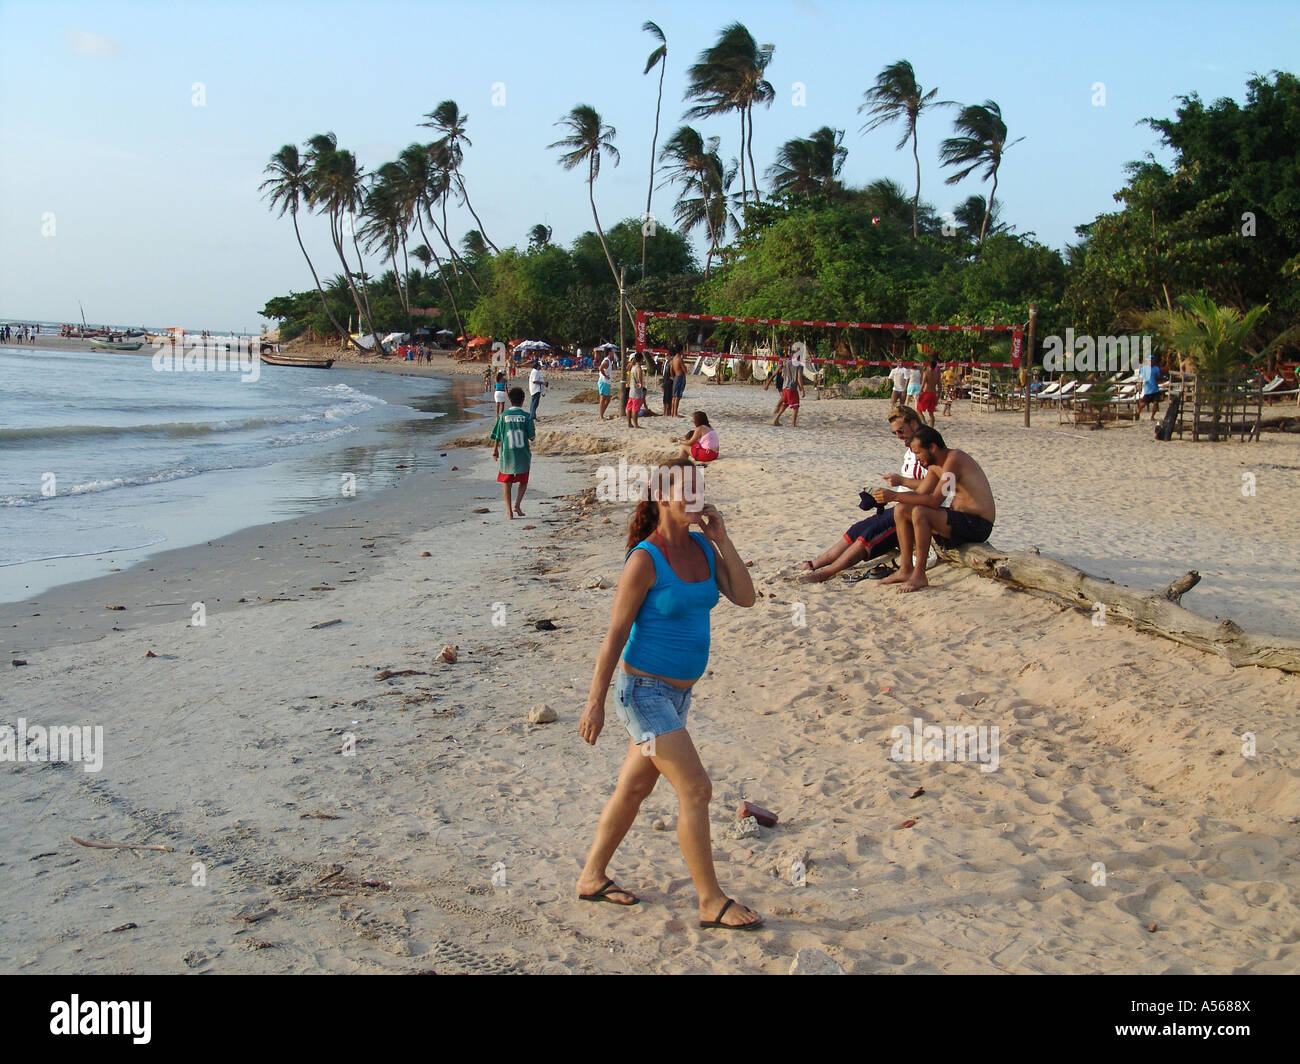 Painet iy7934 brazil beach jericoacoara ceara 2005 country developing nation less economically developed culture emerging Stock Photo